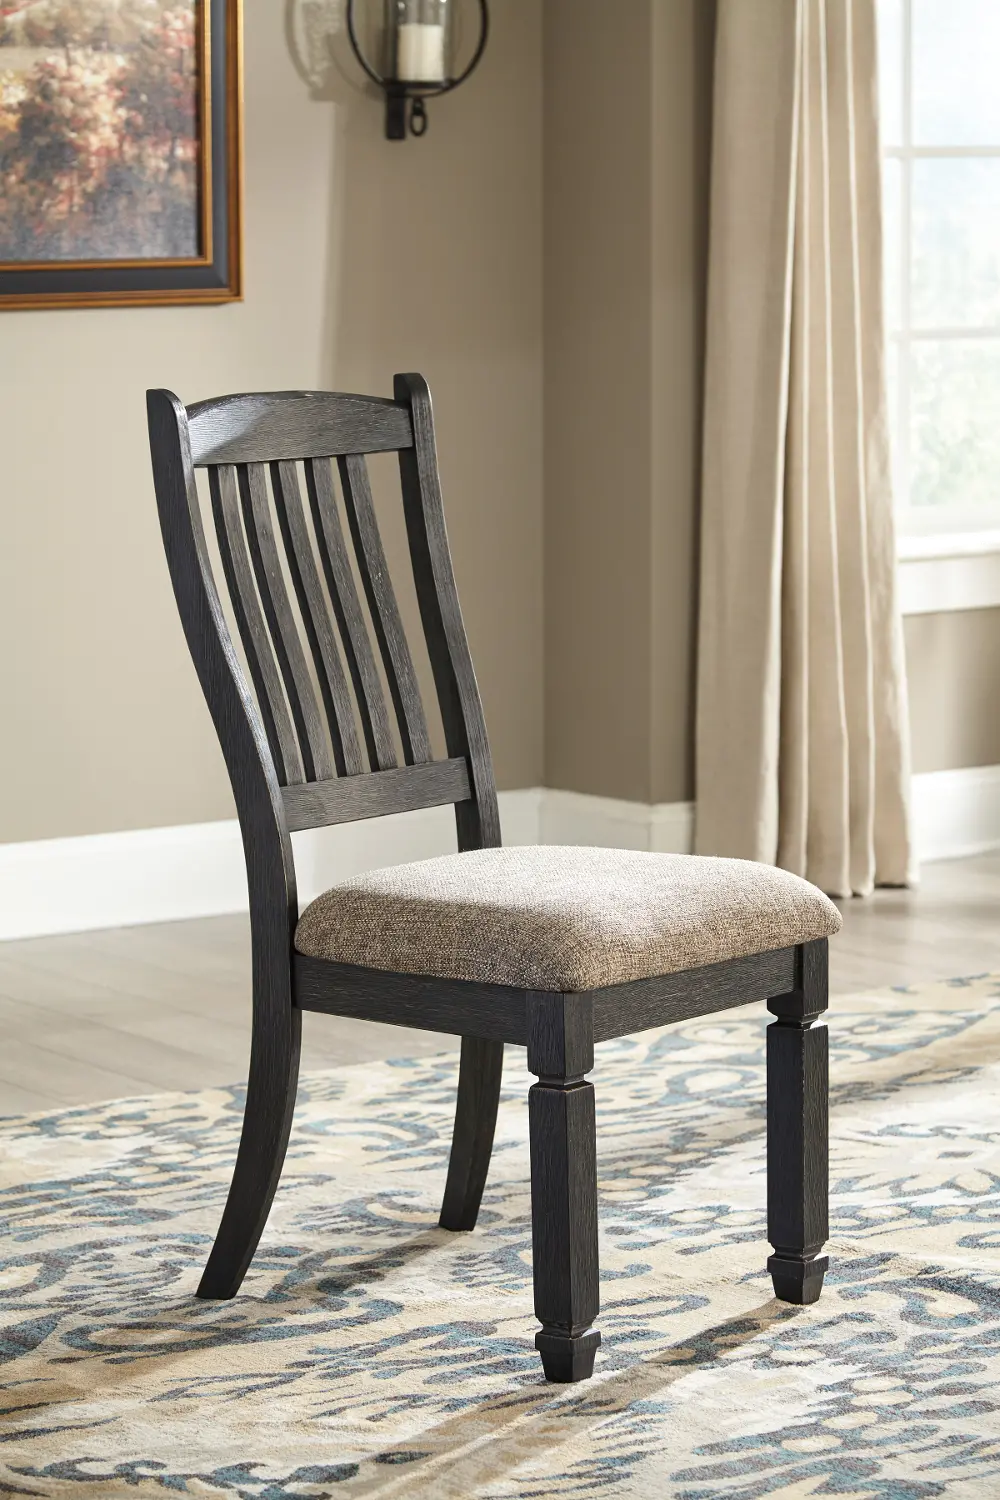 Set of 2 Gray-Brown and Black Upholstered Dining Chairs - Tyler Creek-1